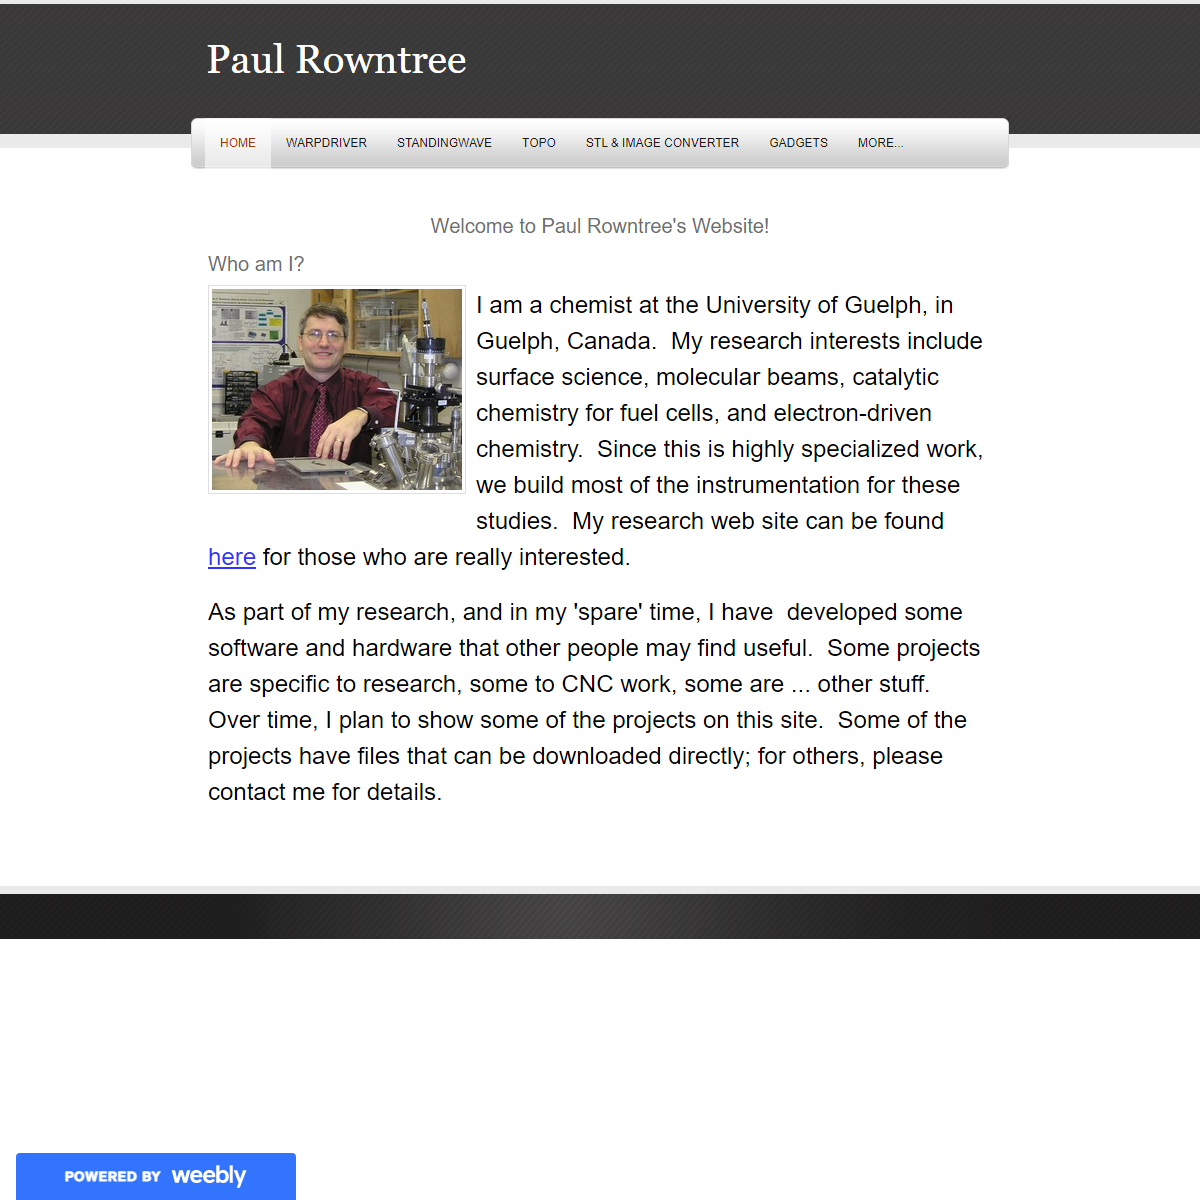 A complete backup of https://paulrowntree.weebly.com/